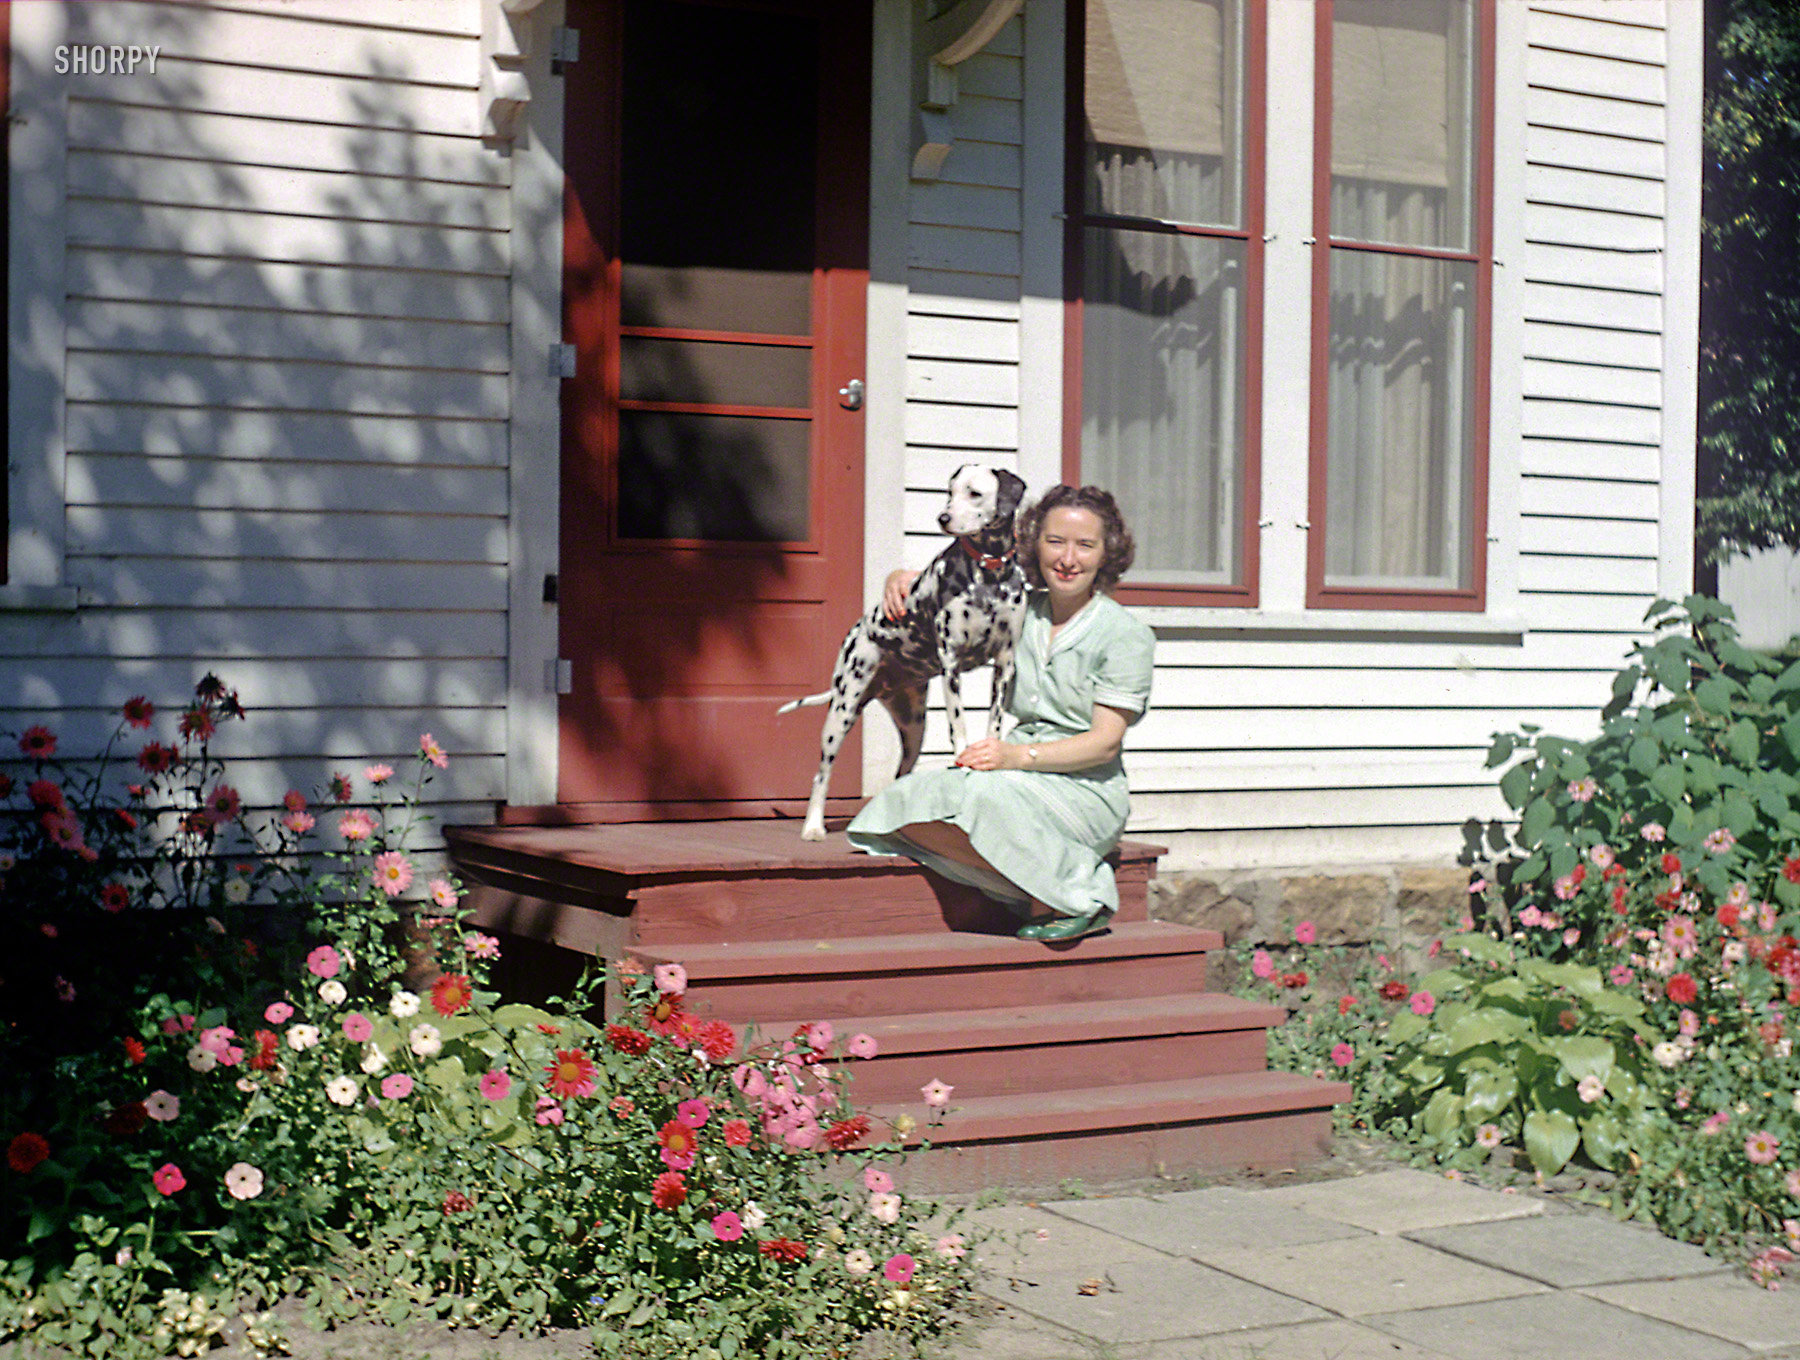 "Grace & Sally -- 18 Sept 1951." Minnesota Kodachromes at home in Blue Earth. 35mm color slide by Hubert Tuttle. View full size.